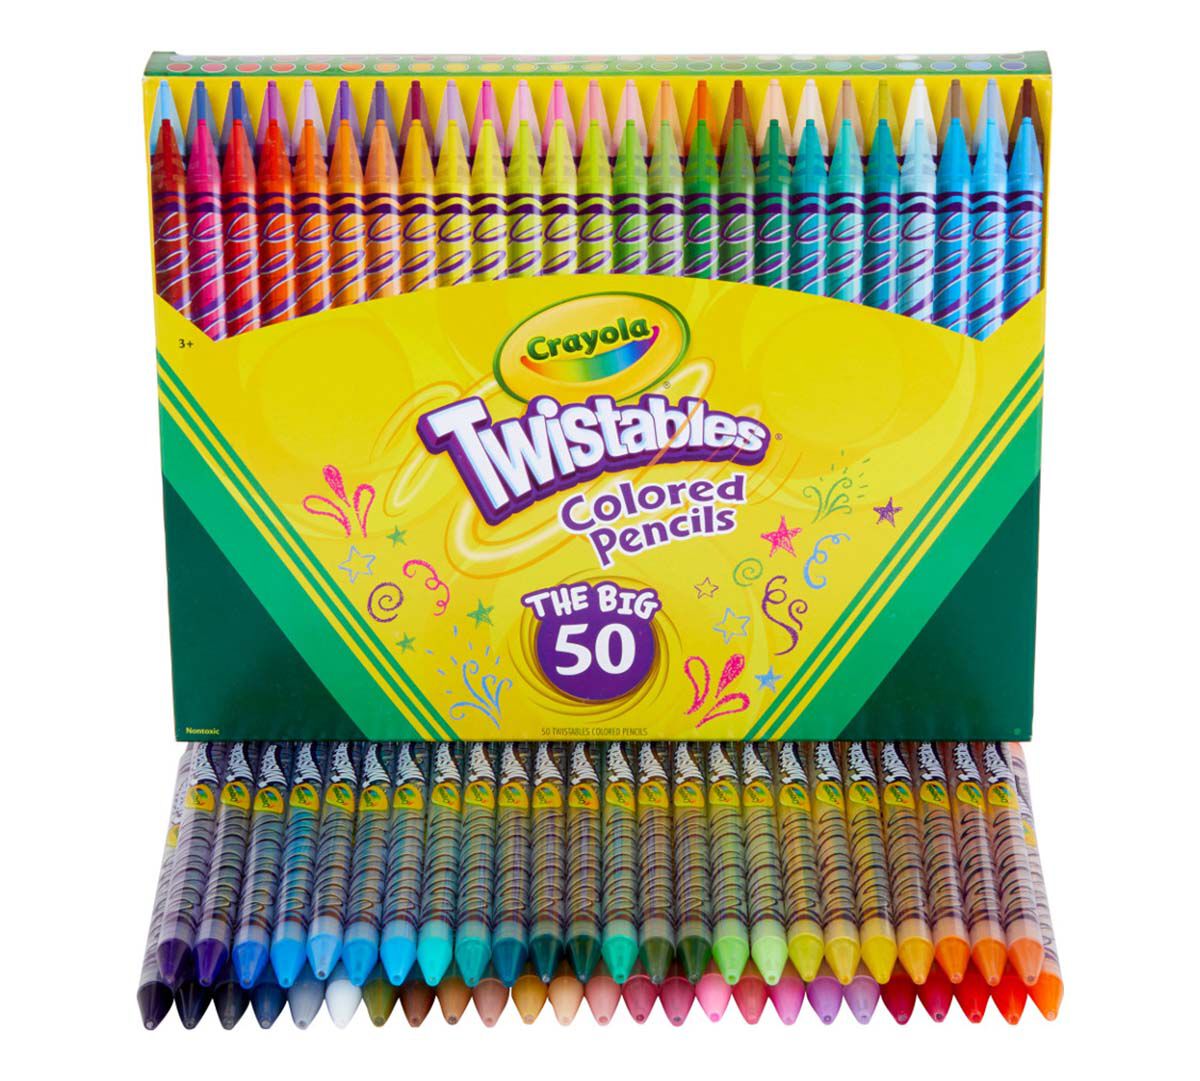 Crayola Twistable Colouring Pencils 3 Pack Blue Red Yellow Quality Lead Crayons 